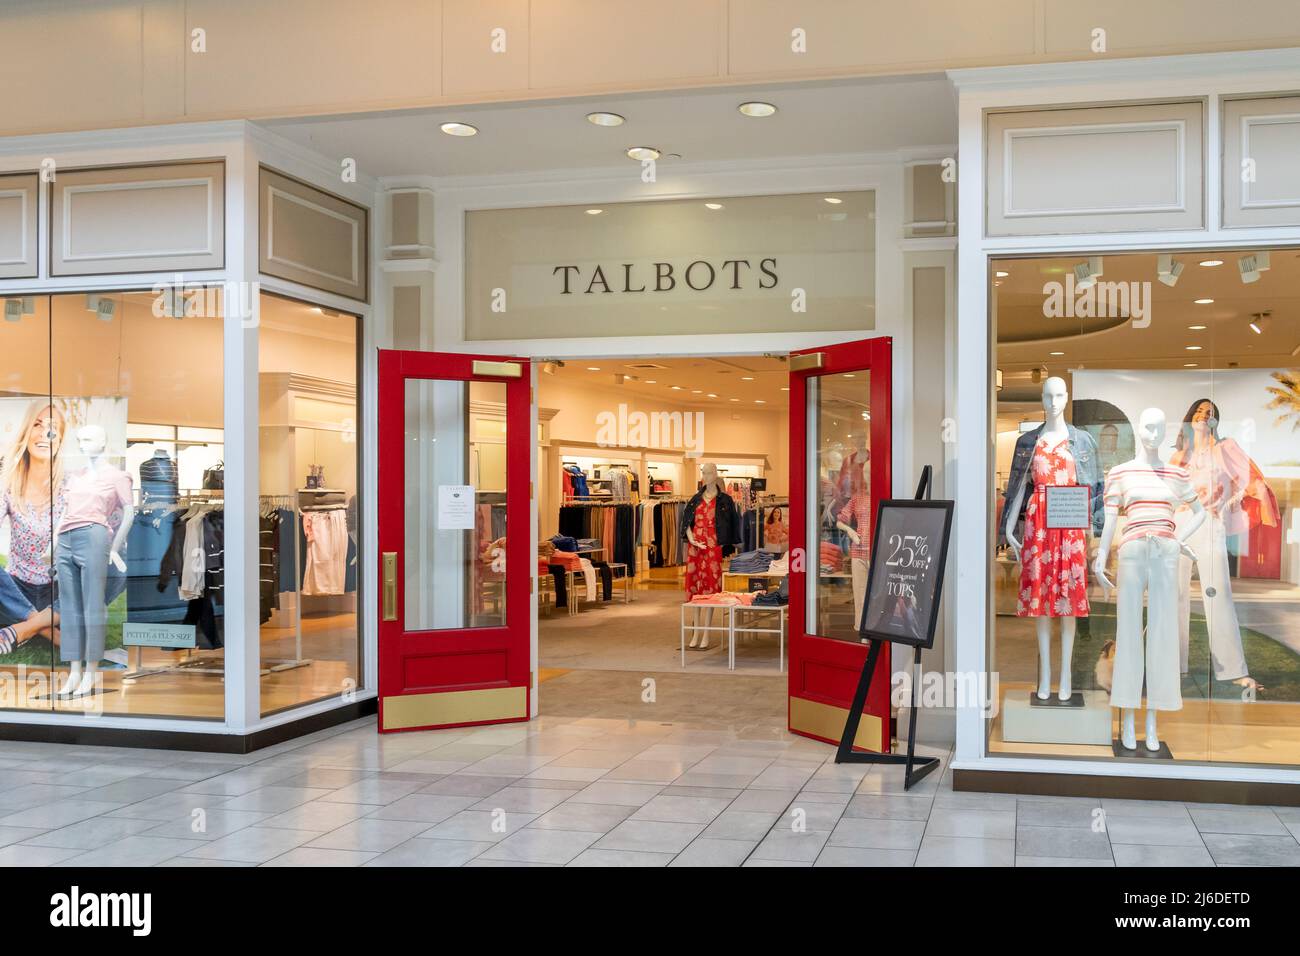 Talbots is an American Specialty Retailer and Direct Marketer of